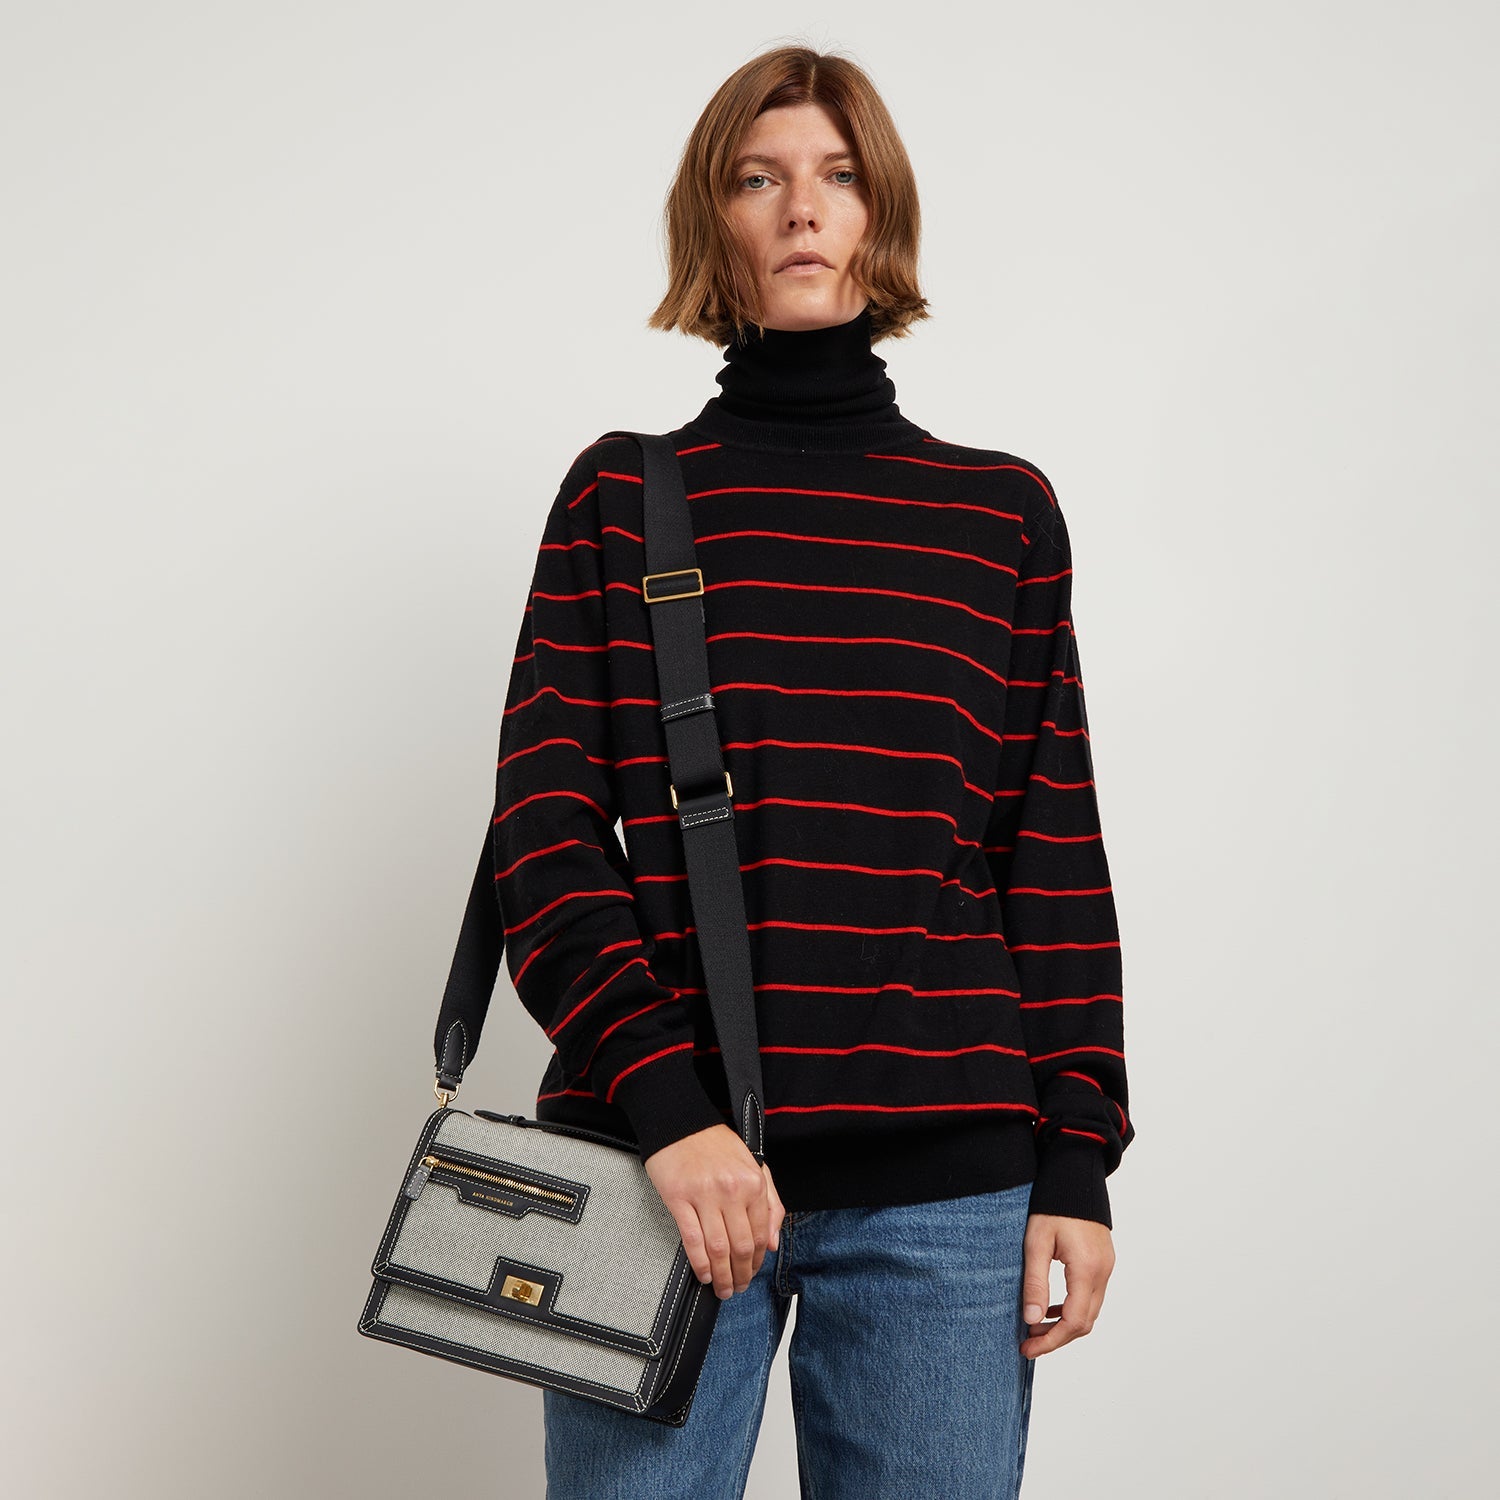 Pocket Cross-body -

                  
                    Mixed Canvas in Salt and Pepper -
                  

                  Anya Hindmarch US
